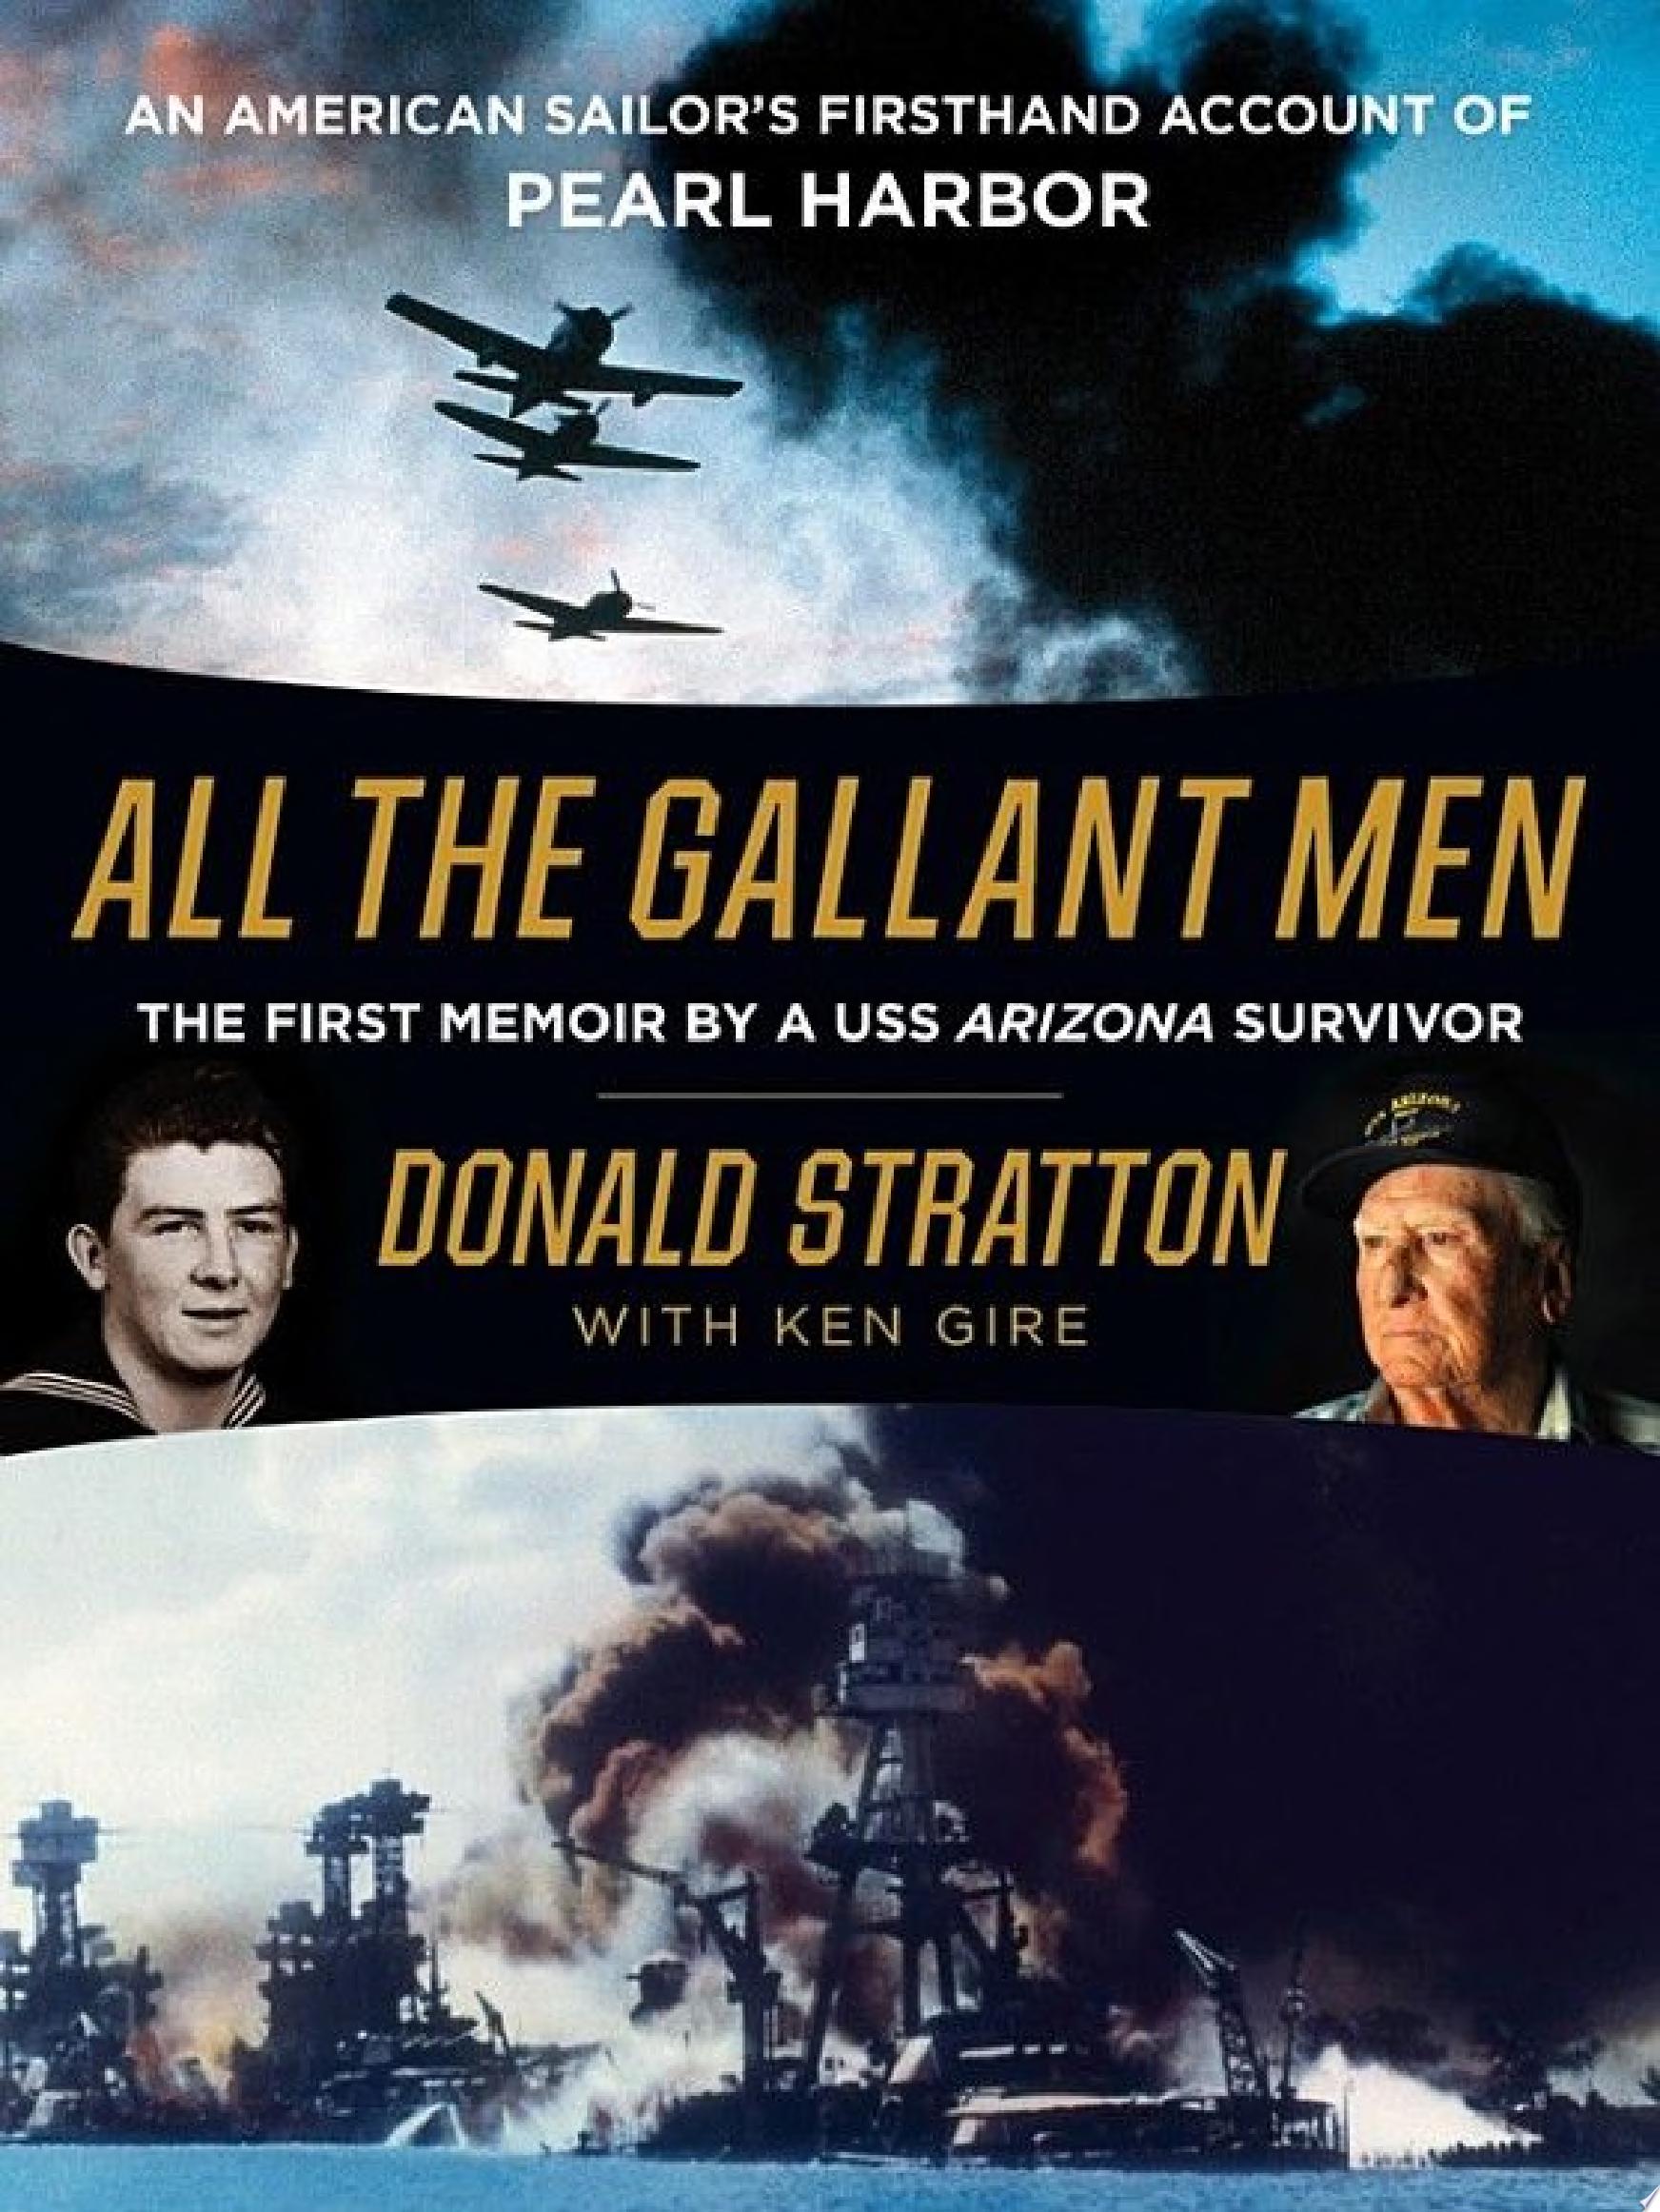 Image for "All the Gallant Men"